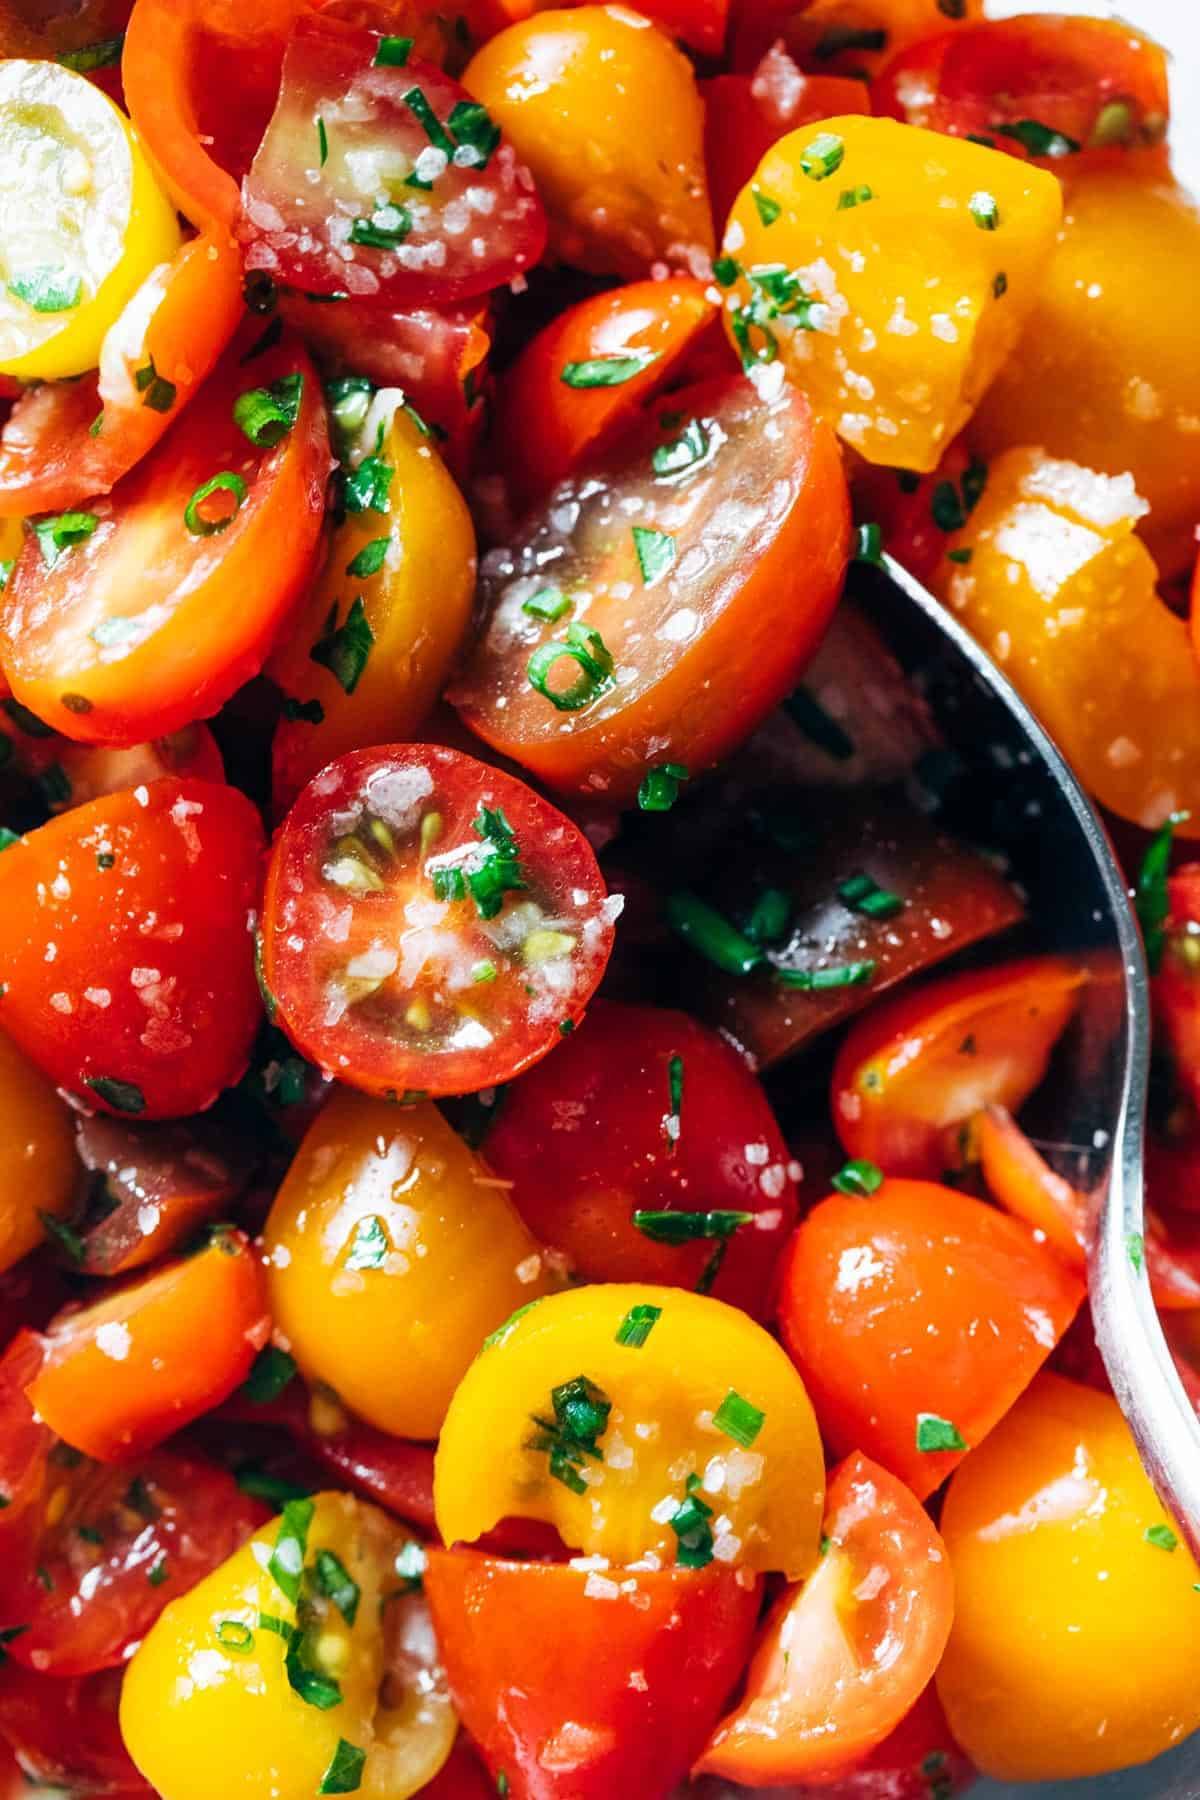 Marinated tomatoes with a spoon.